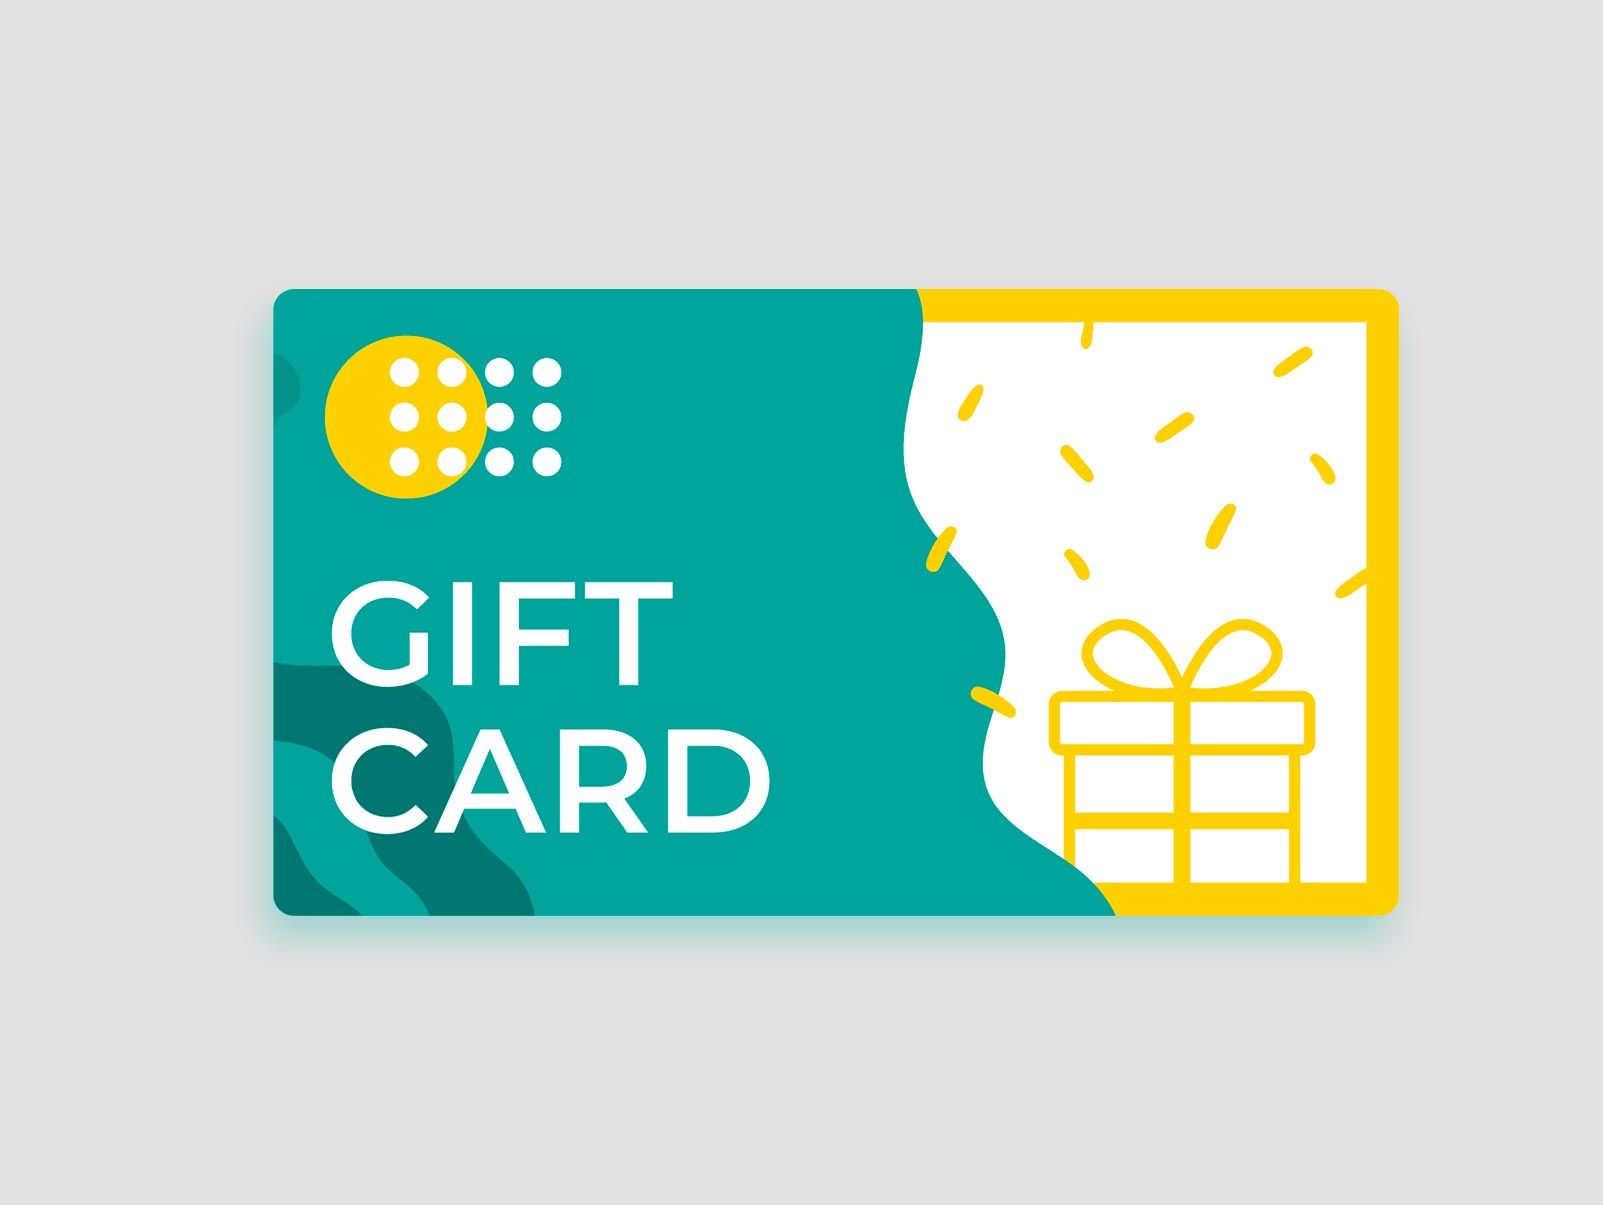 default-giftcard-main-image